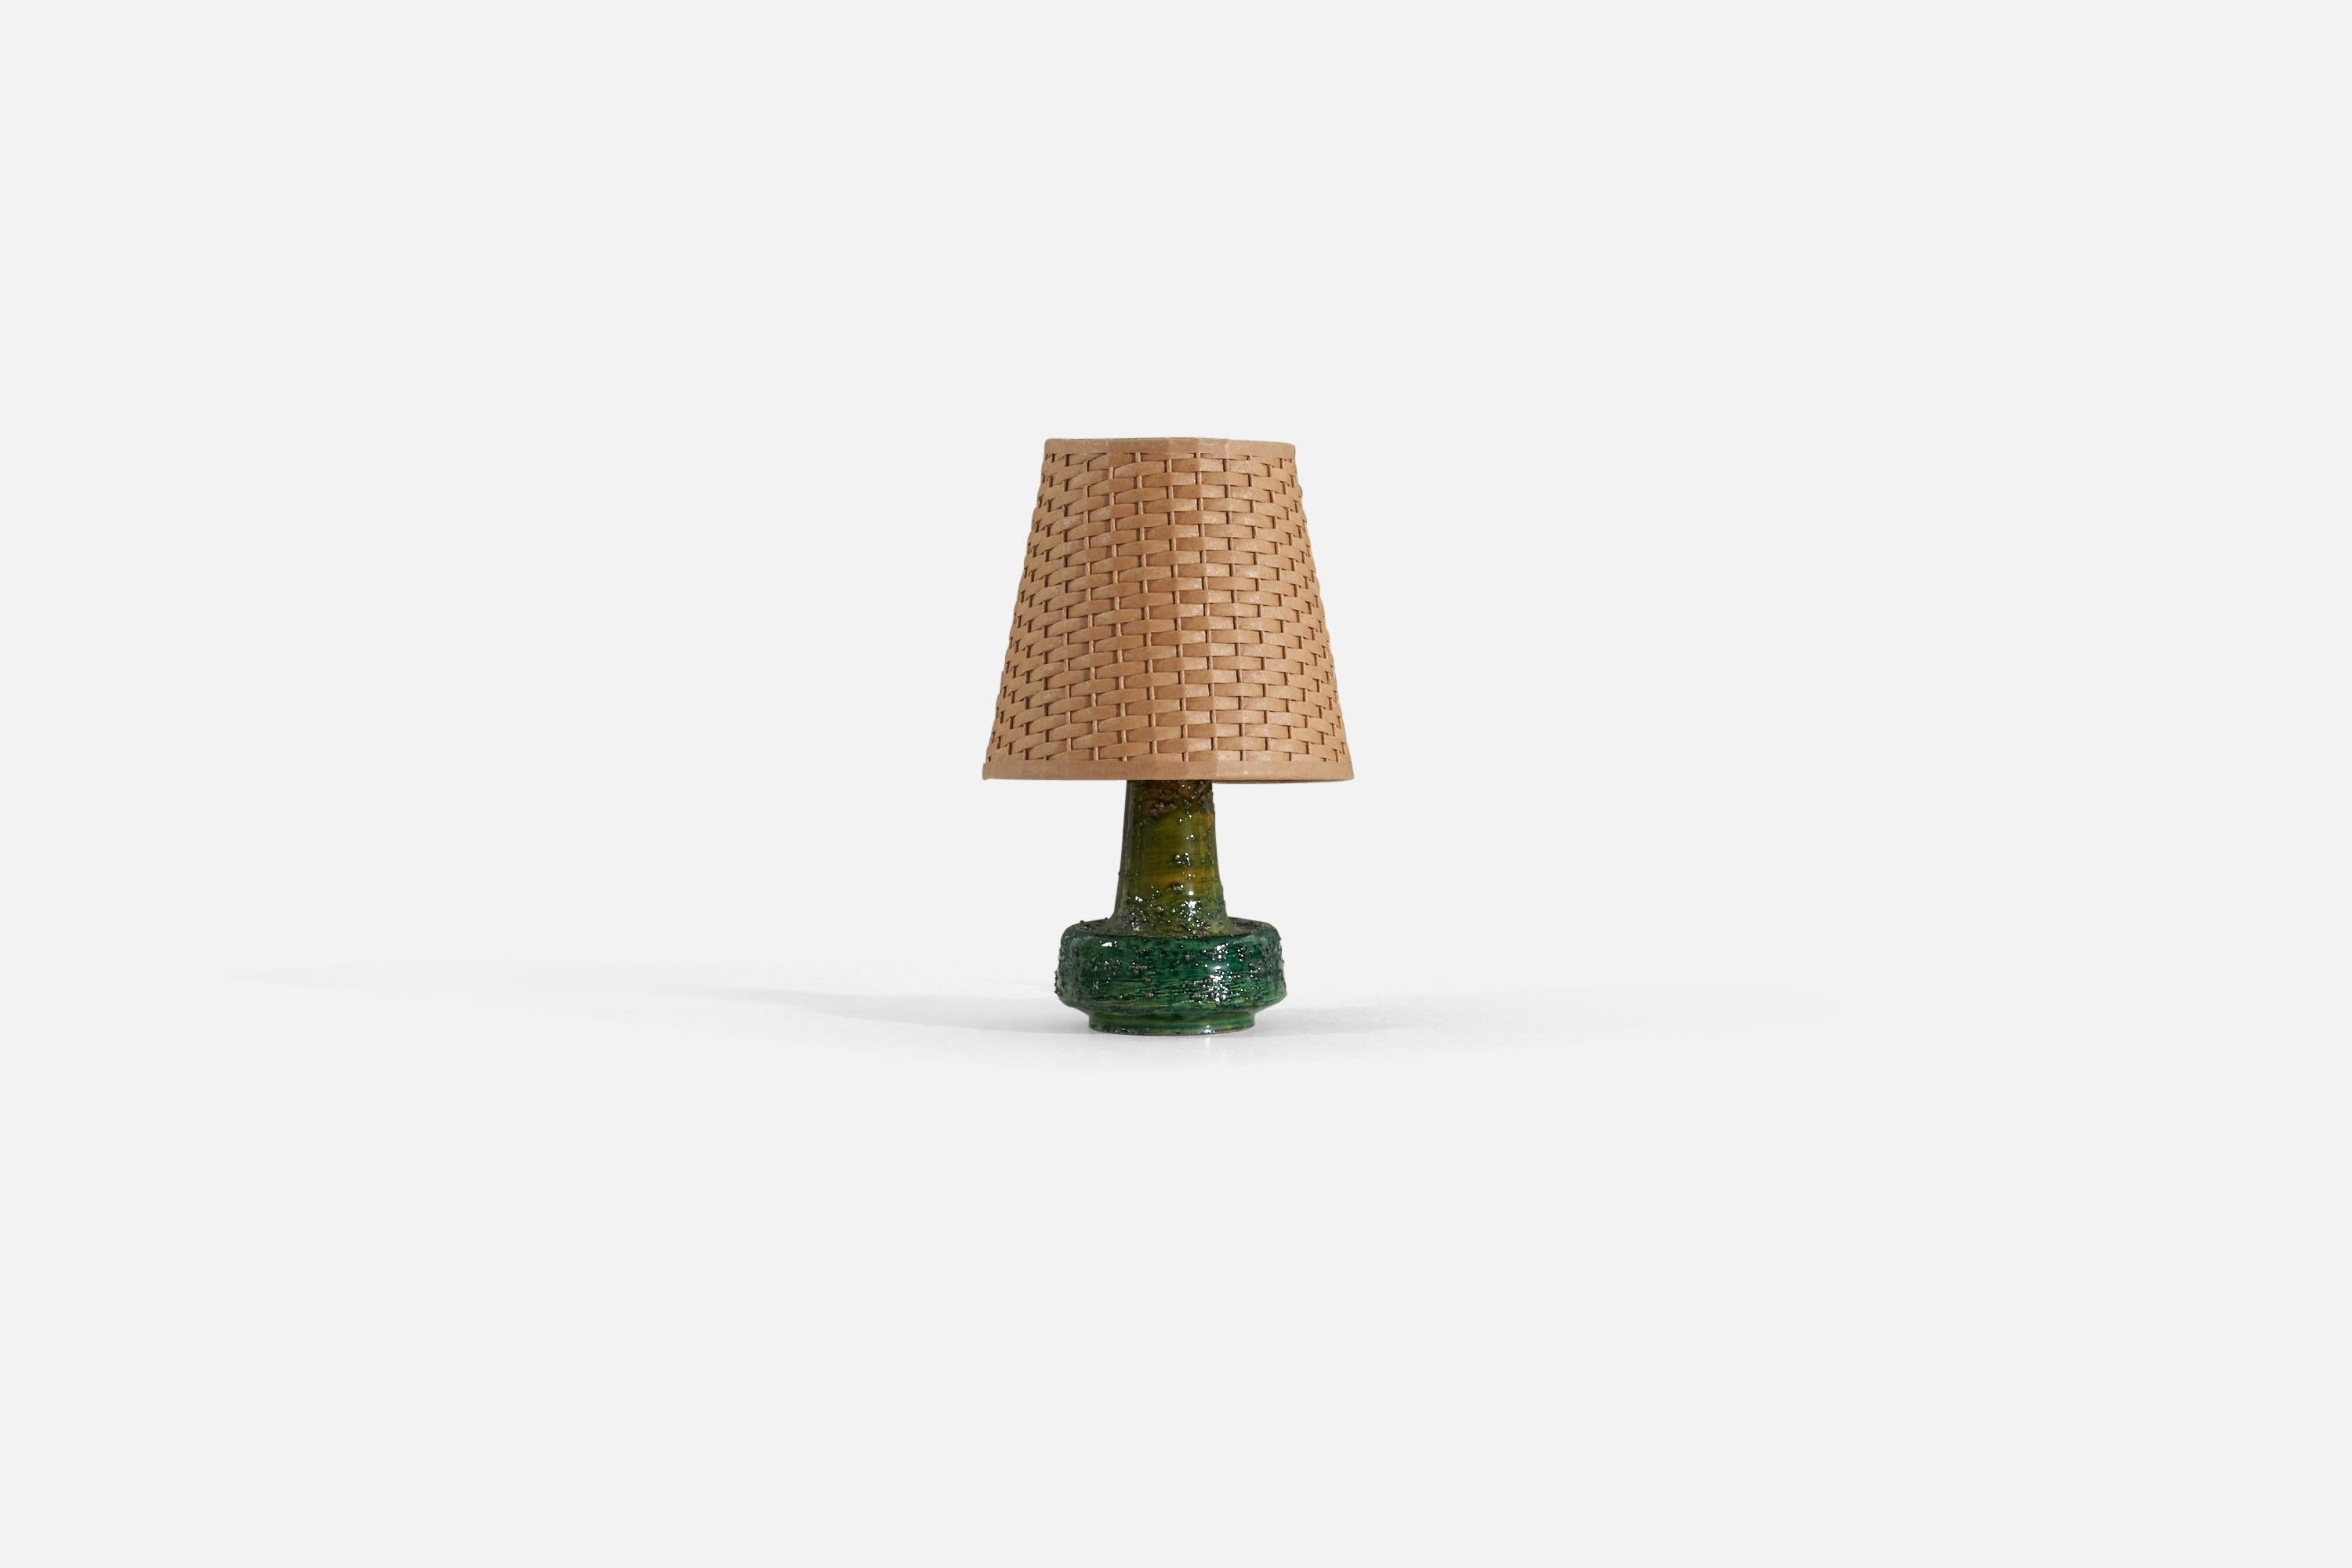 A green-glazed stoneware table lamp designed and produced in Sweden, 1960s.

Measurements listed are of lamp without lampshade. Upon request illustrated model lampshade can be included in purchase.

Shade : 4.25 x 6.25 x 6
Lamp with shade : 10